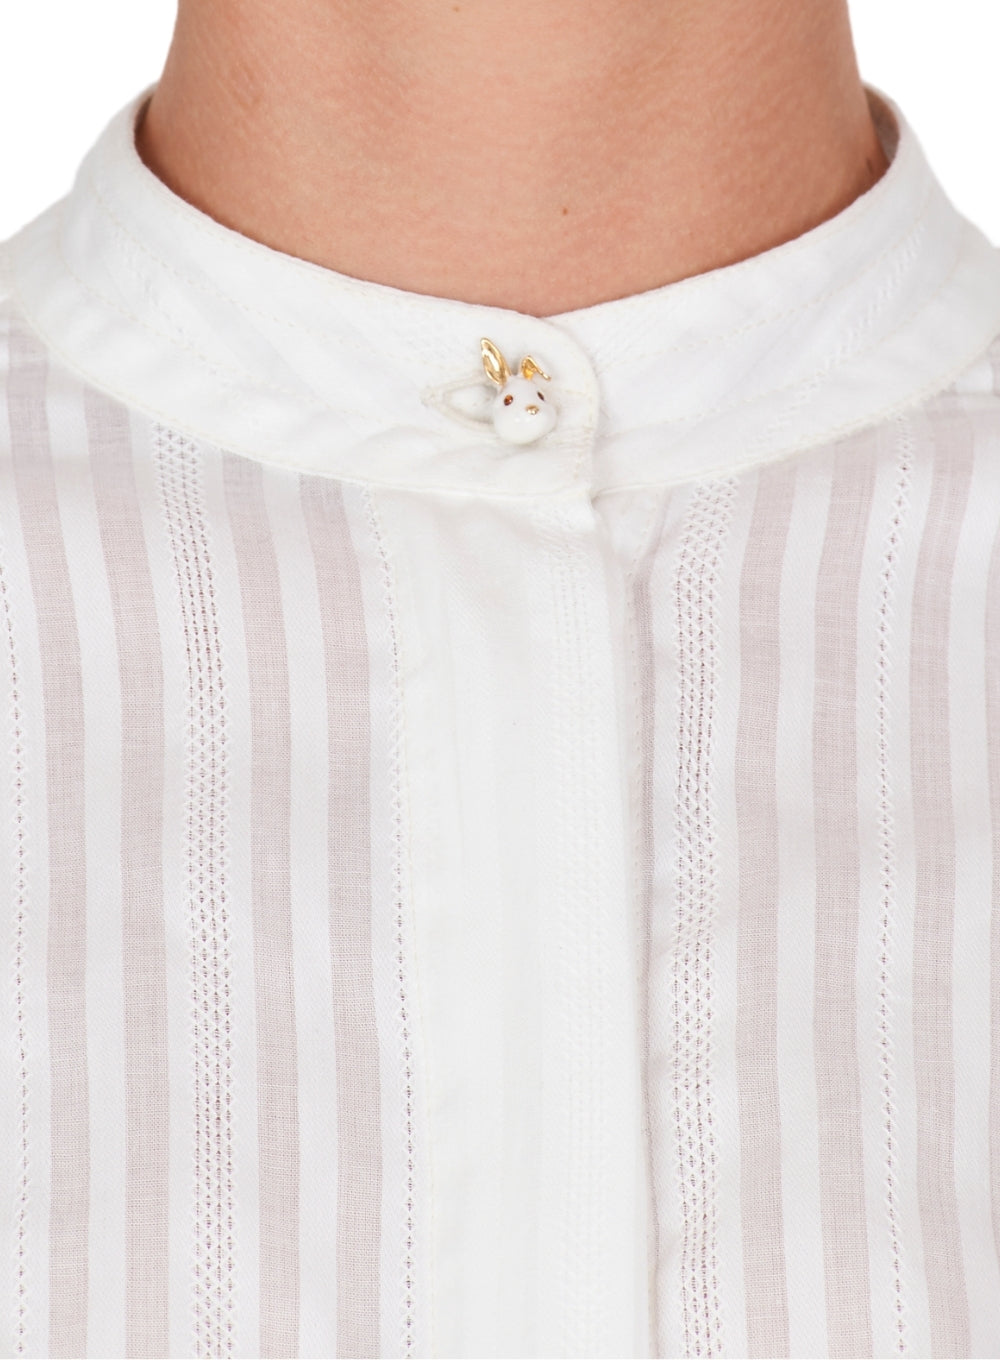 ISABEL BENENATO | Cropped Shirt With Jewel Button